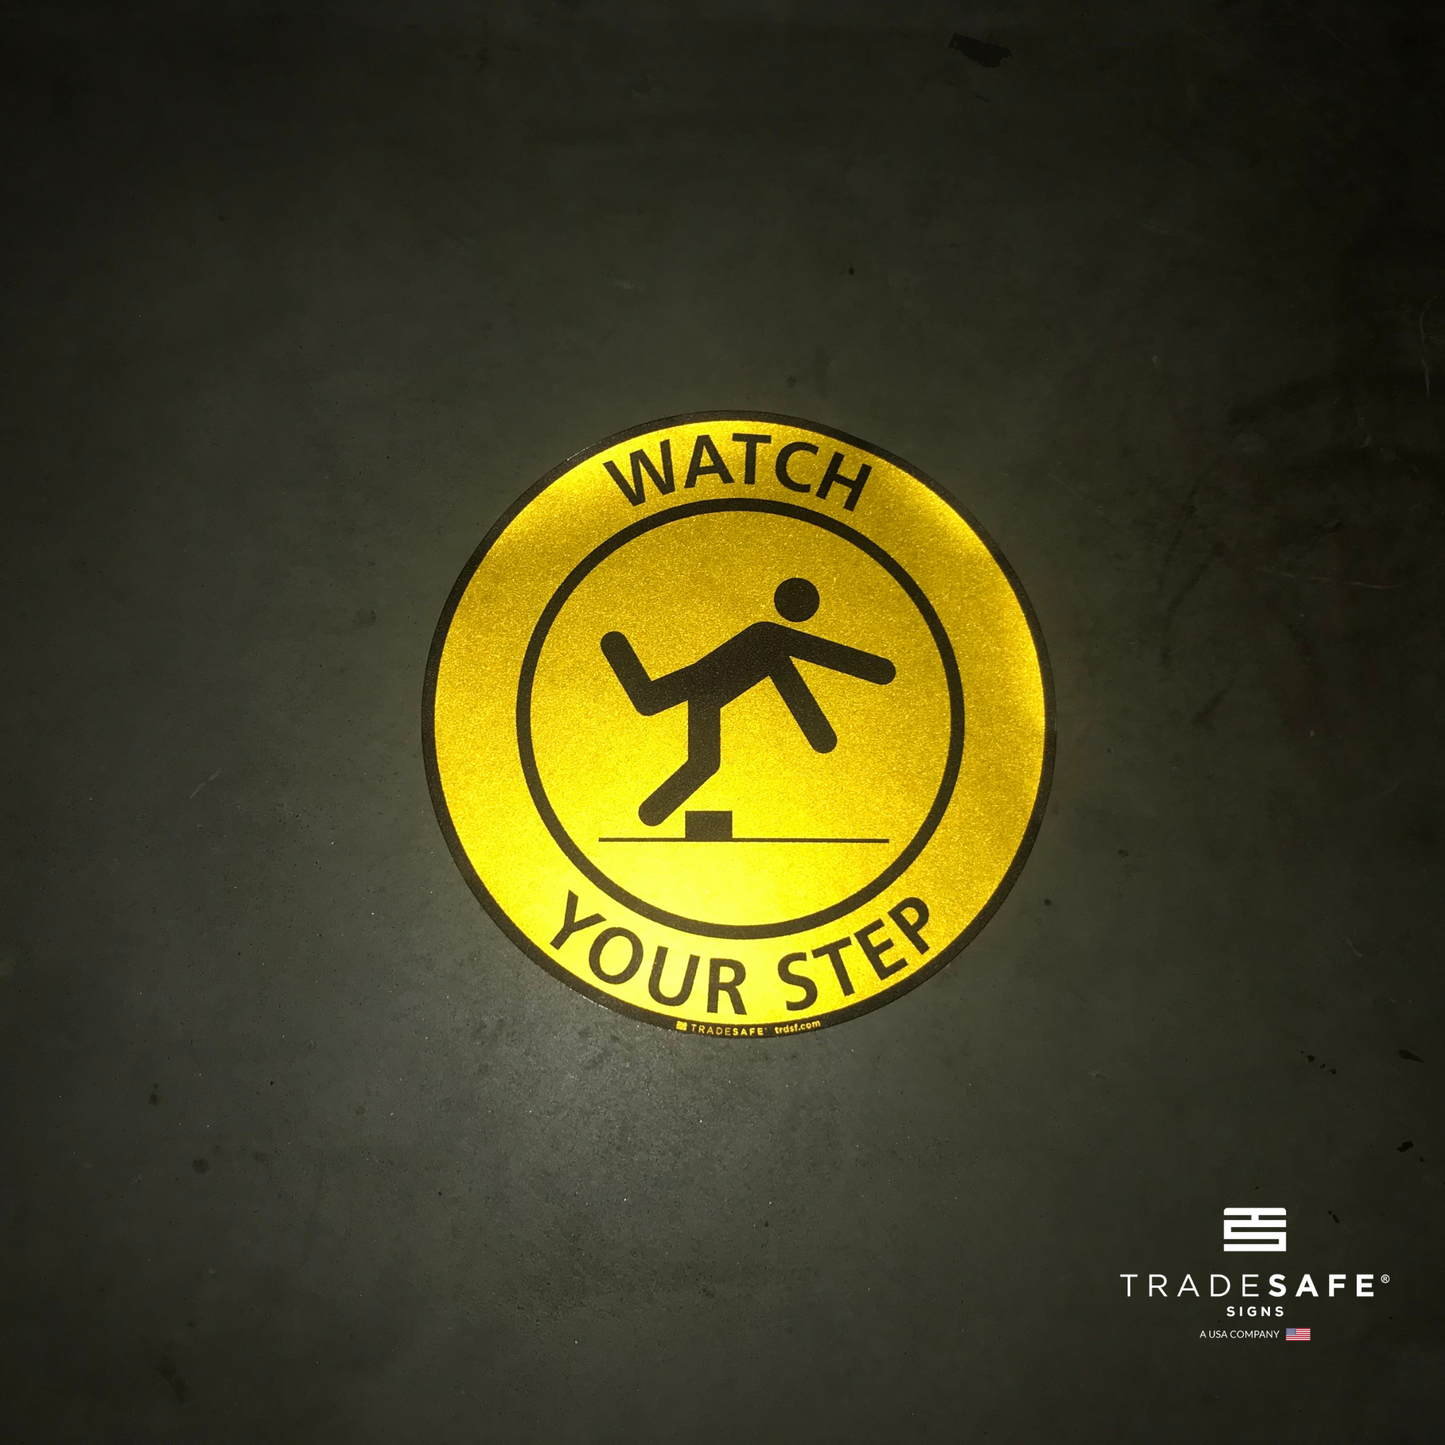 reflective attribute of adhesive vinyl "watch your step" sign on black background